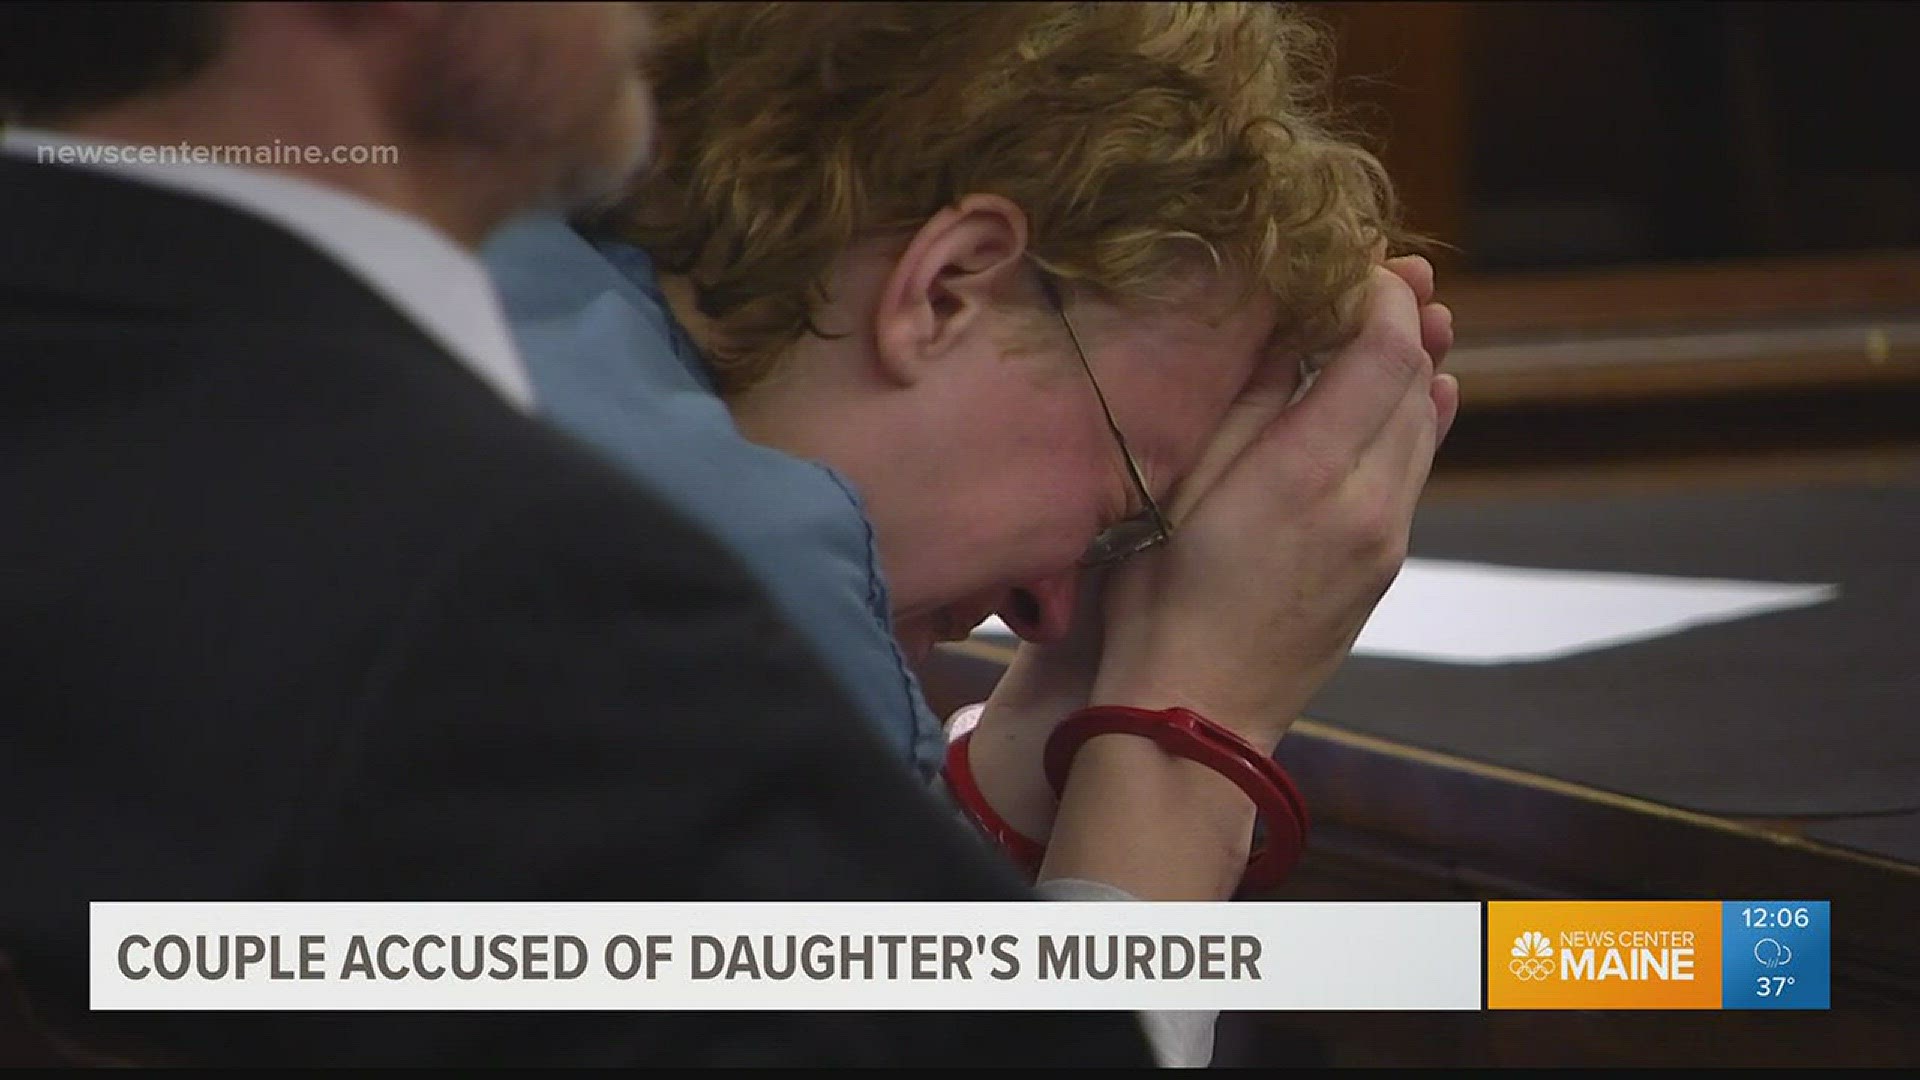 Mother accused of killing daughter is pregnant